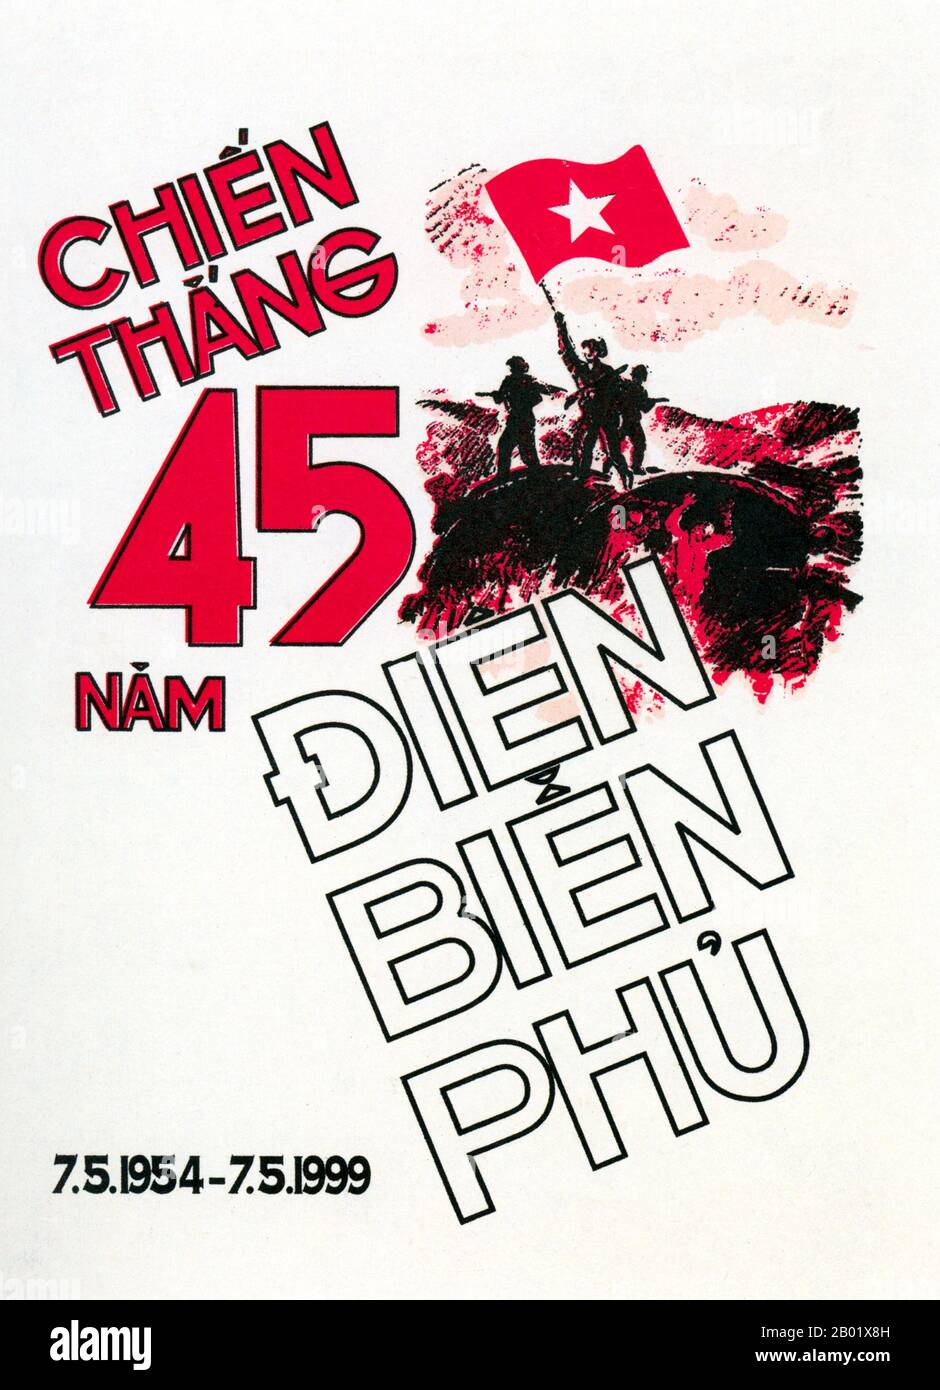 The important Battle of Dien Bien Phu was fought between the Việt Minh (led by General Vo Nguyen Giap), and the French Union (led by General Henri Navarre, successor to General Raoul Salan). The siege of the French garrison lasted fifty-seven days, from 5:30PM on March 13 to 5:30PM on May 7, 1954.  The southern outpost or fire base of the camp, Isabelle, did not follow the cease-fire order and fought until the next day at 01:00AM; a few hours before the long-scheduled Geneva Meeting's Indochina conference involving the United States, the United Kingdom, the French Union and the Soviet Union. Stock Photo